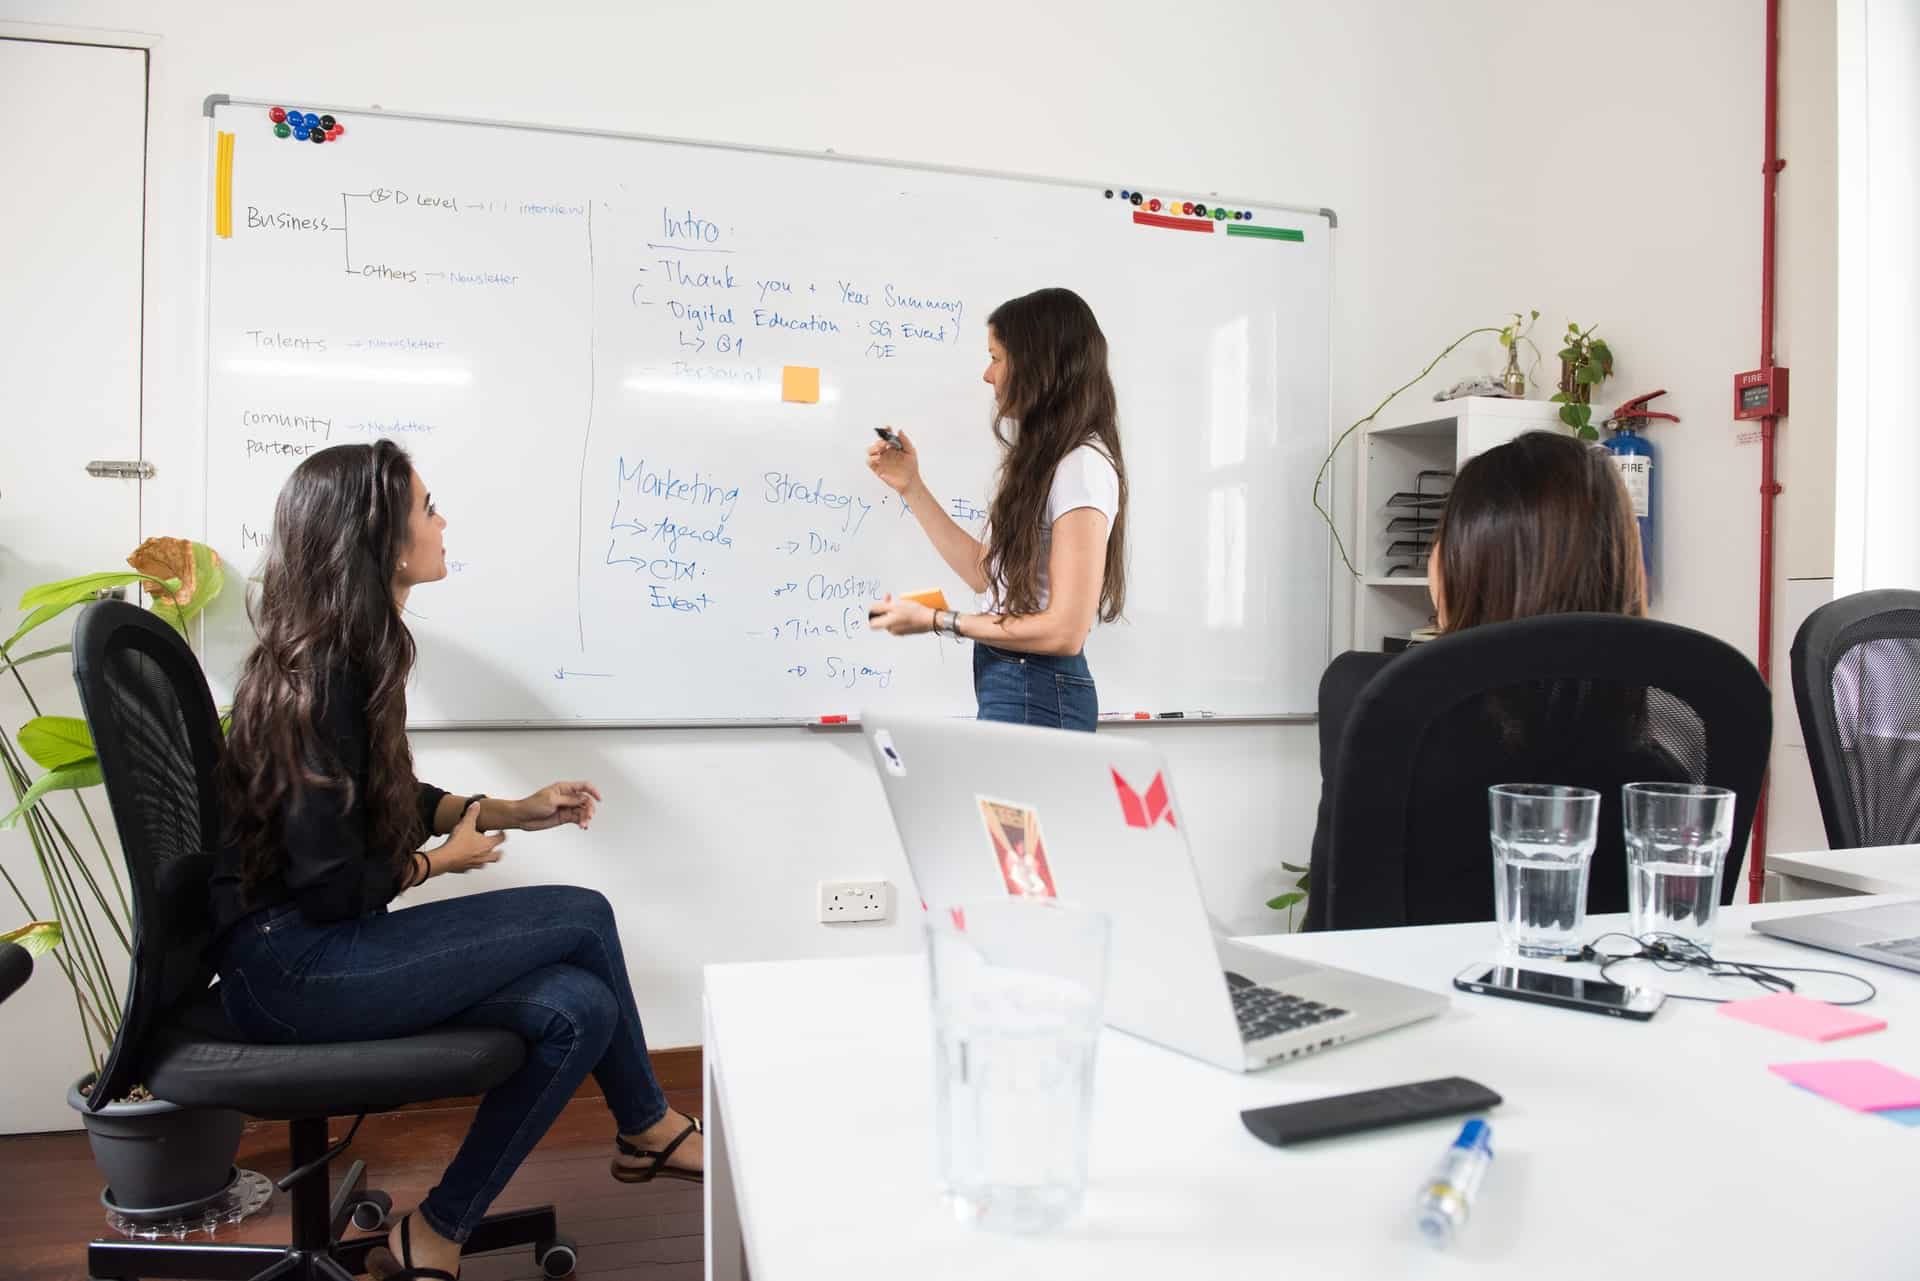 Image shows a woman writing on a whiteboard talking to a woman sitting down in an office chair, illustrating brainstorming.